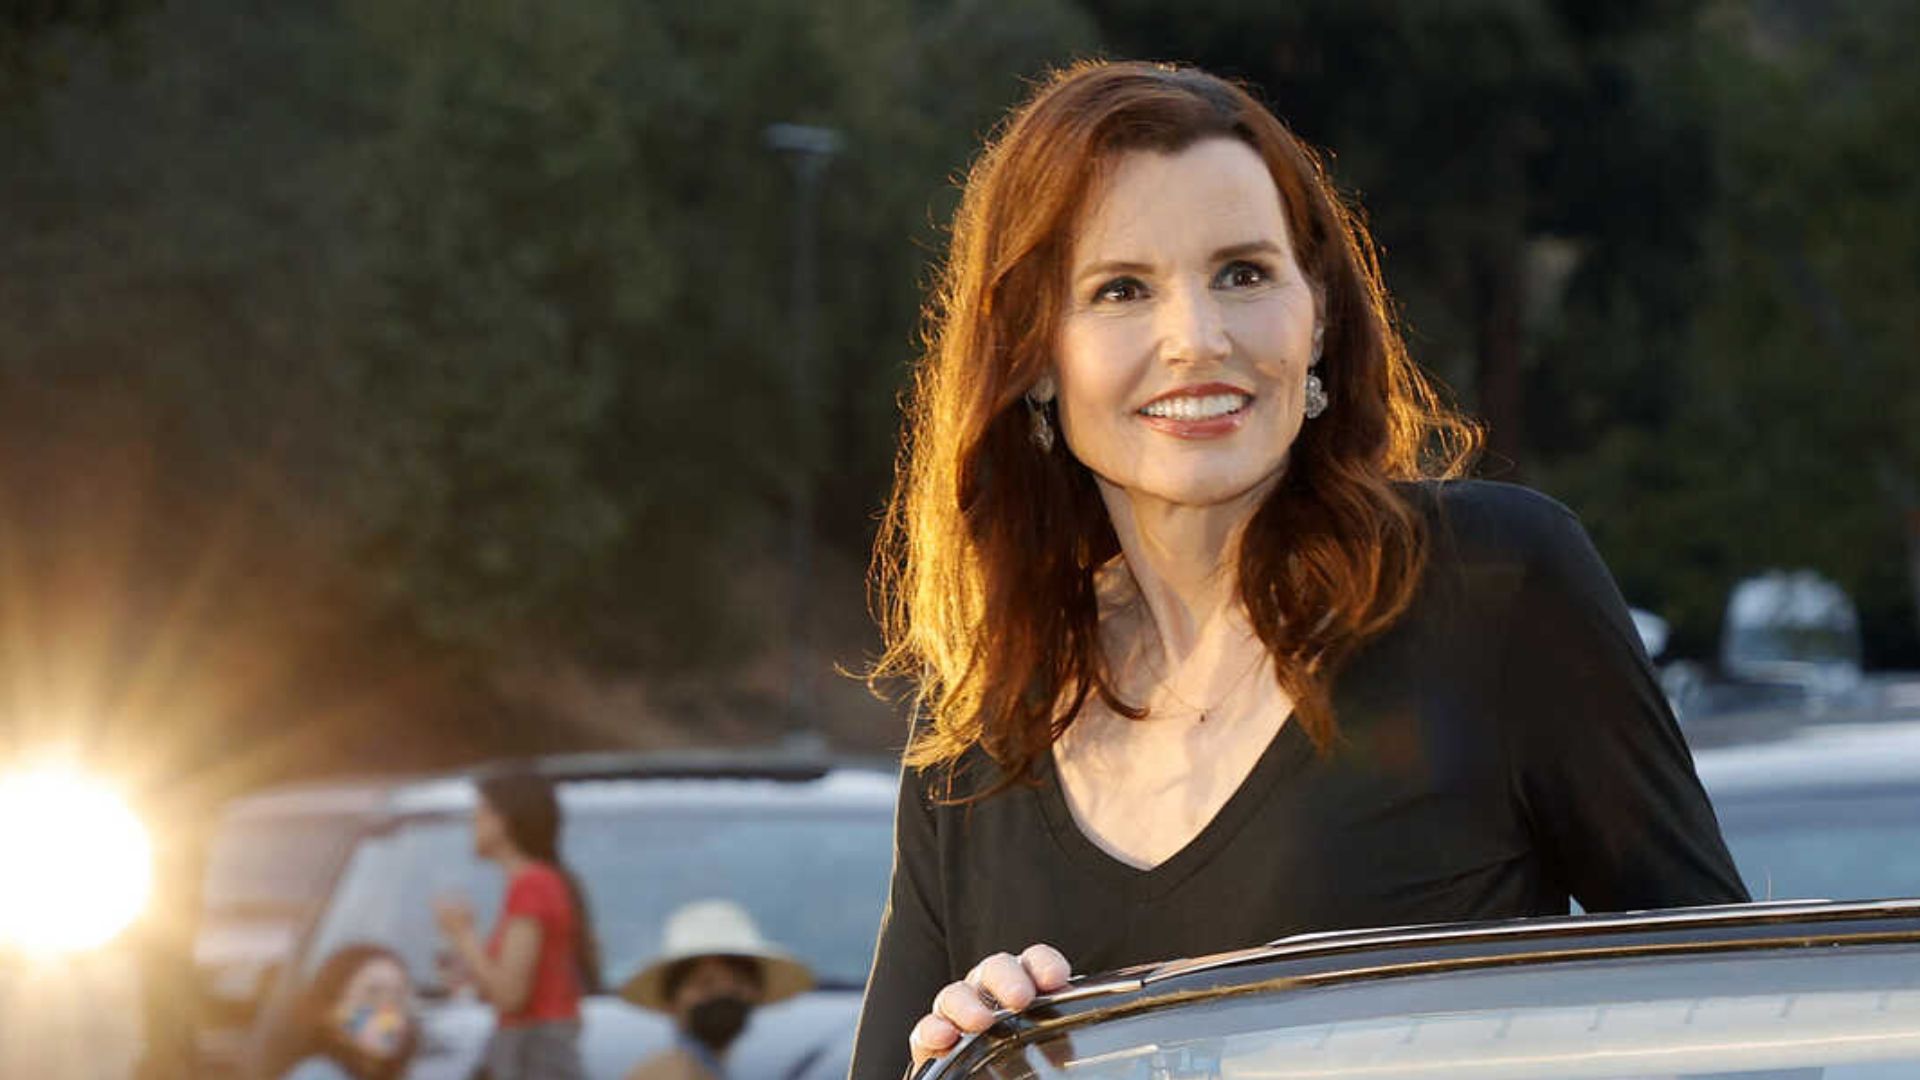 Geena Davis Coming Out Of The Car